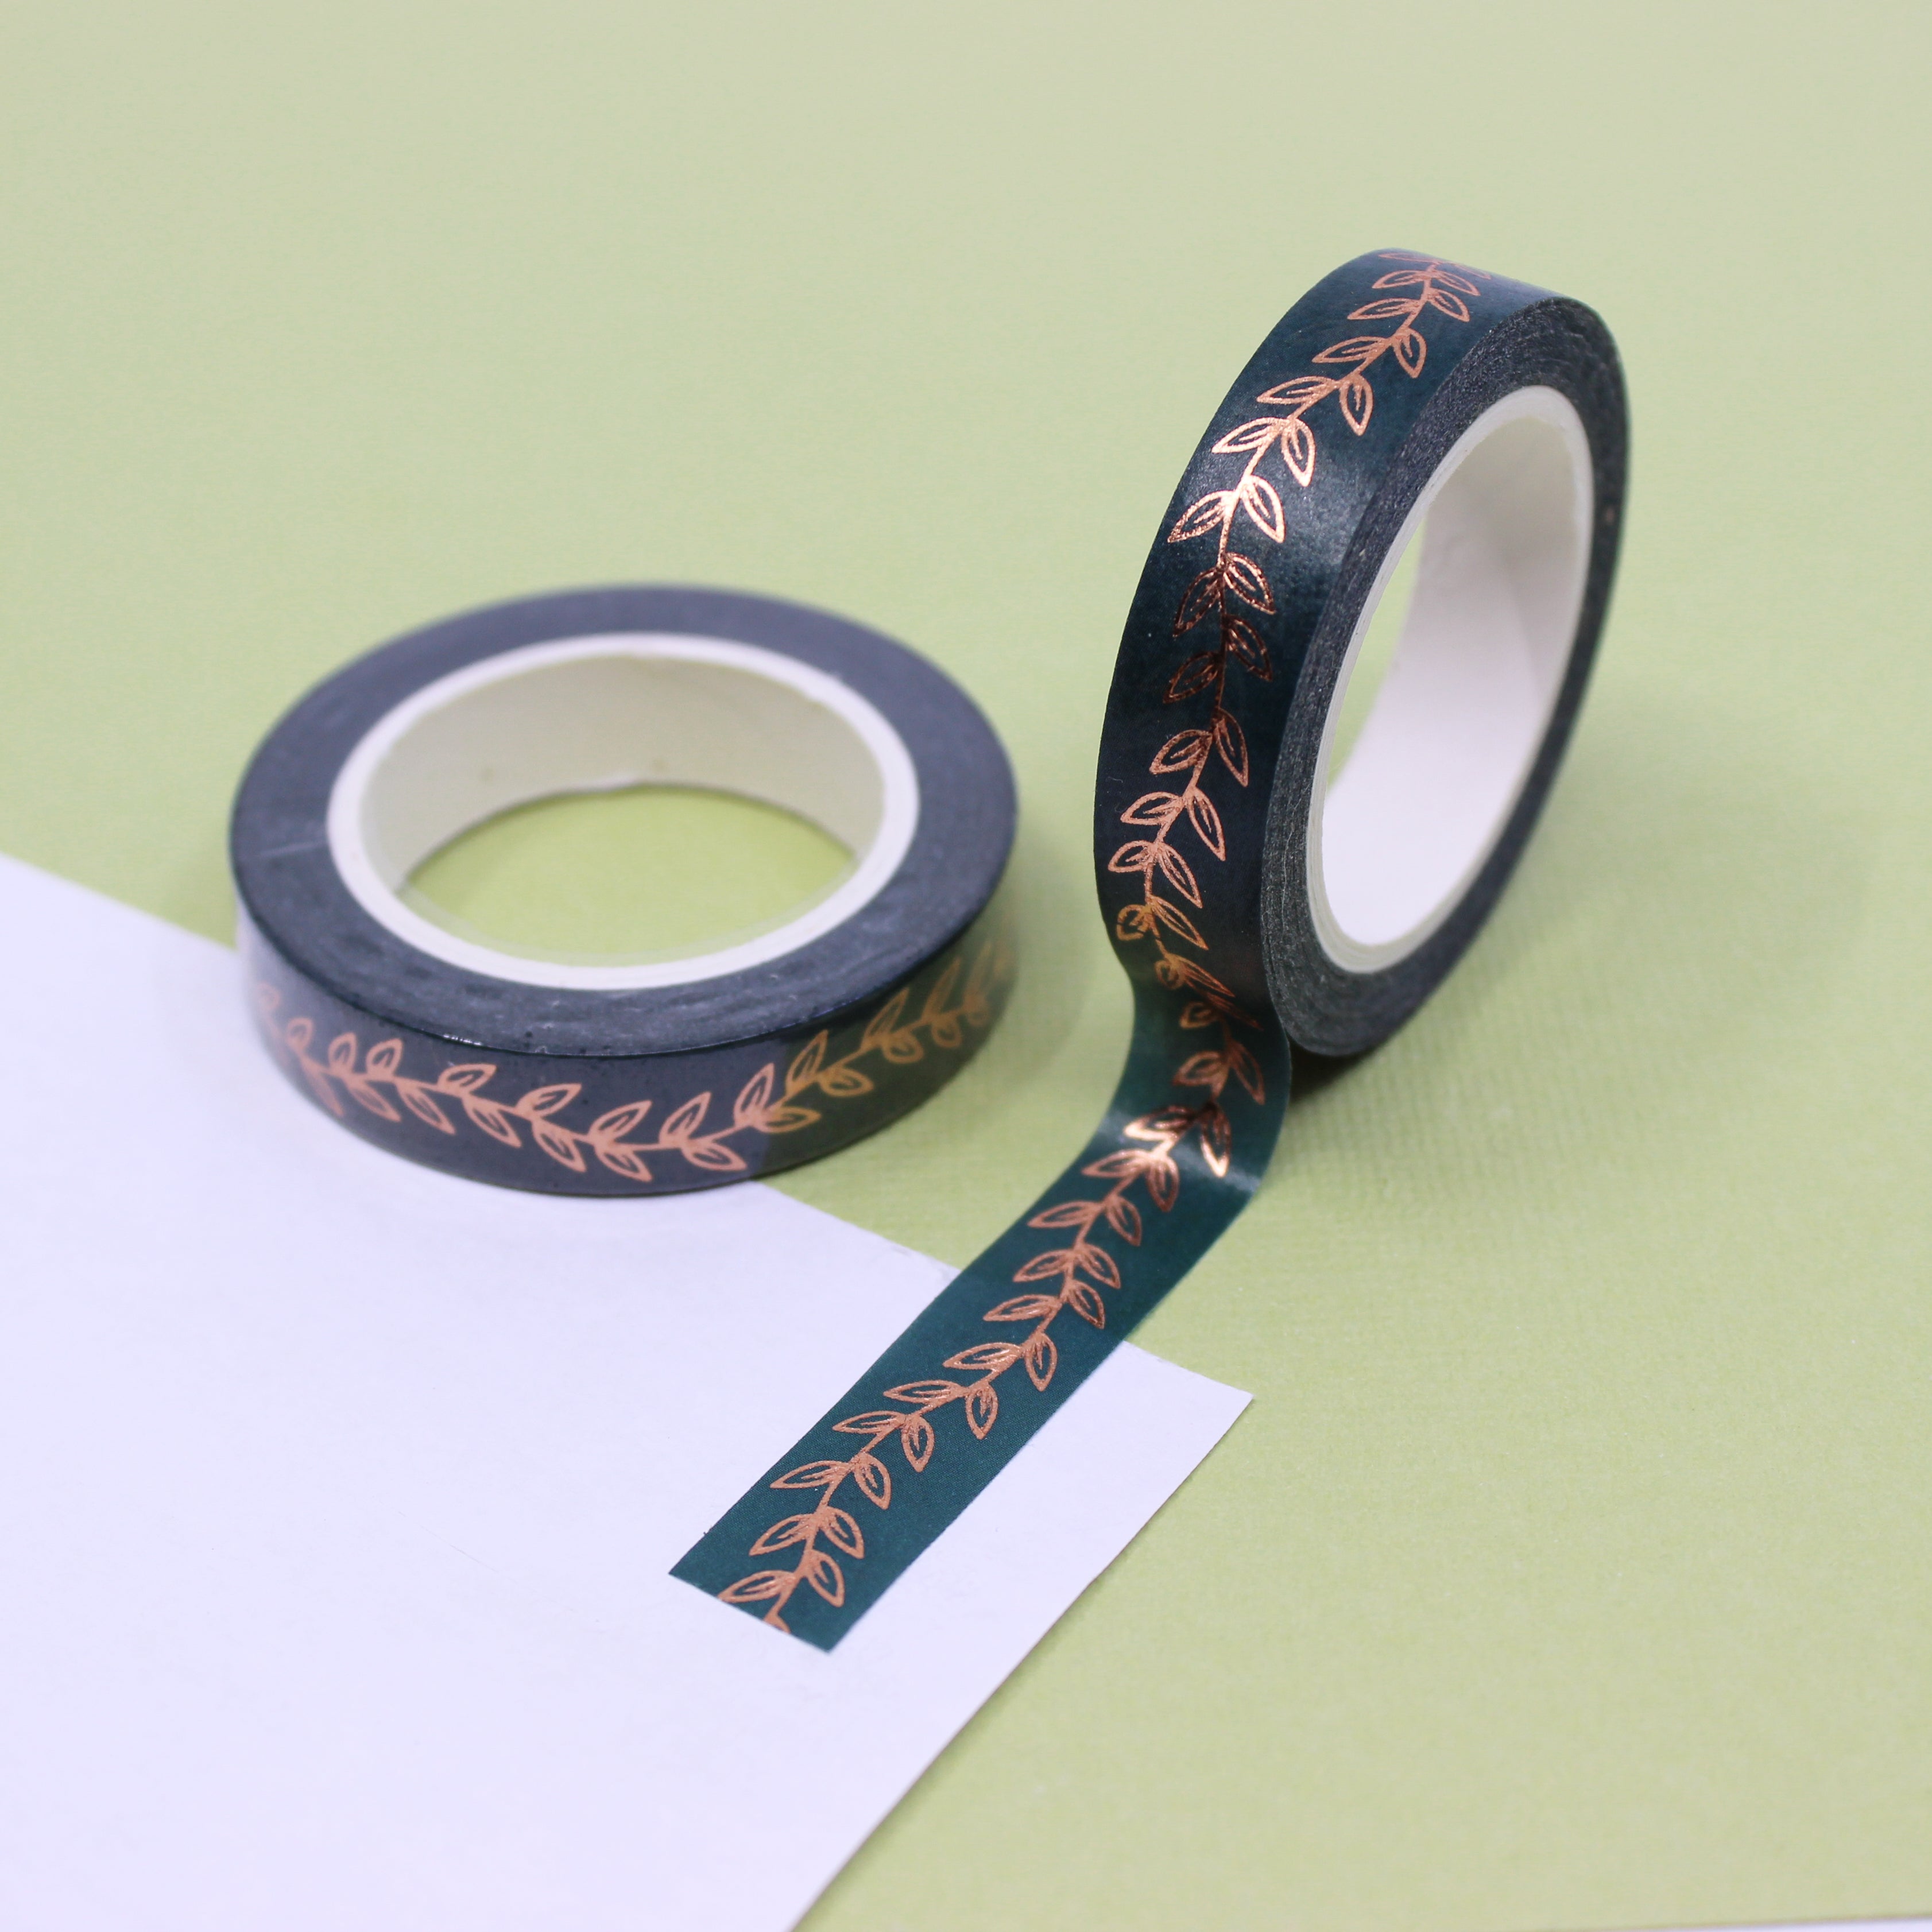 This is narrow gold foil branch cluster Border Washi Tape from BBB Supplies Craft Shop